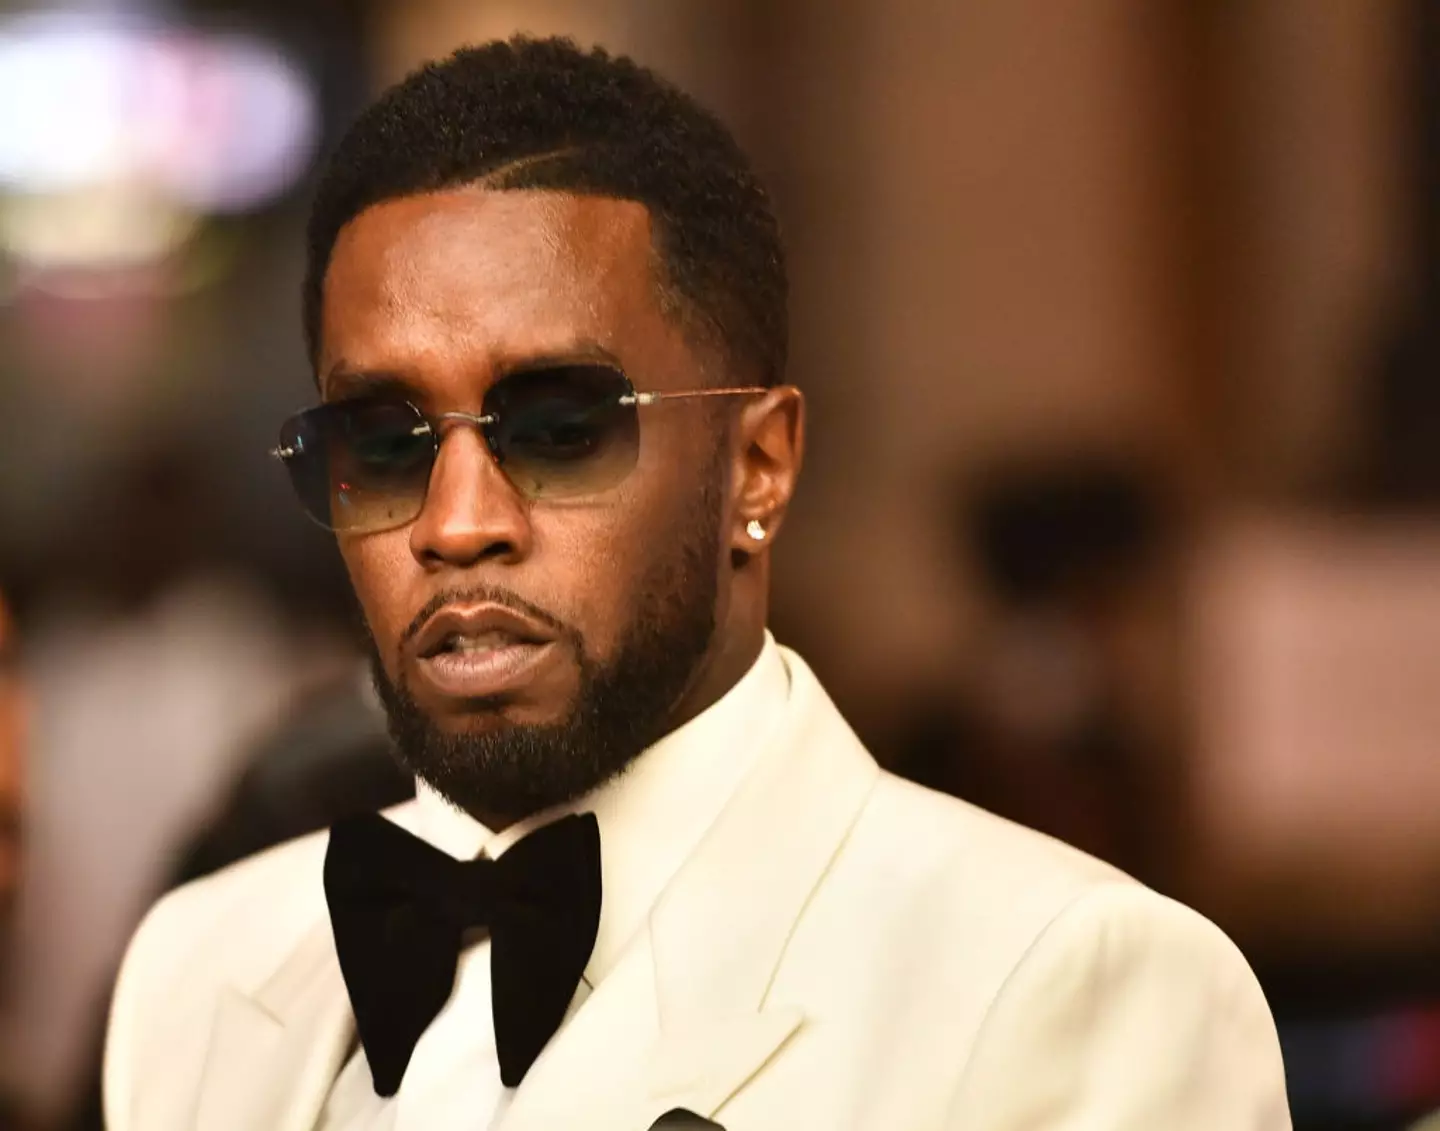 Two properties belonging to Diddy have been raided by federal officers.